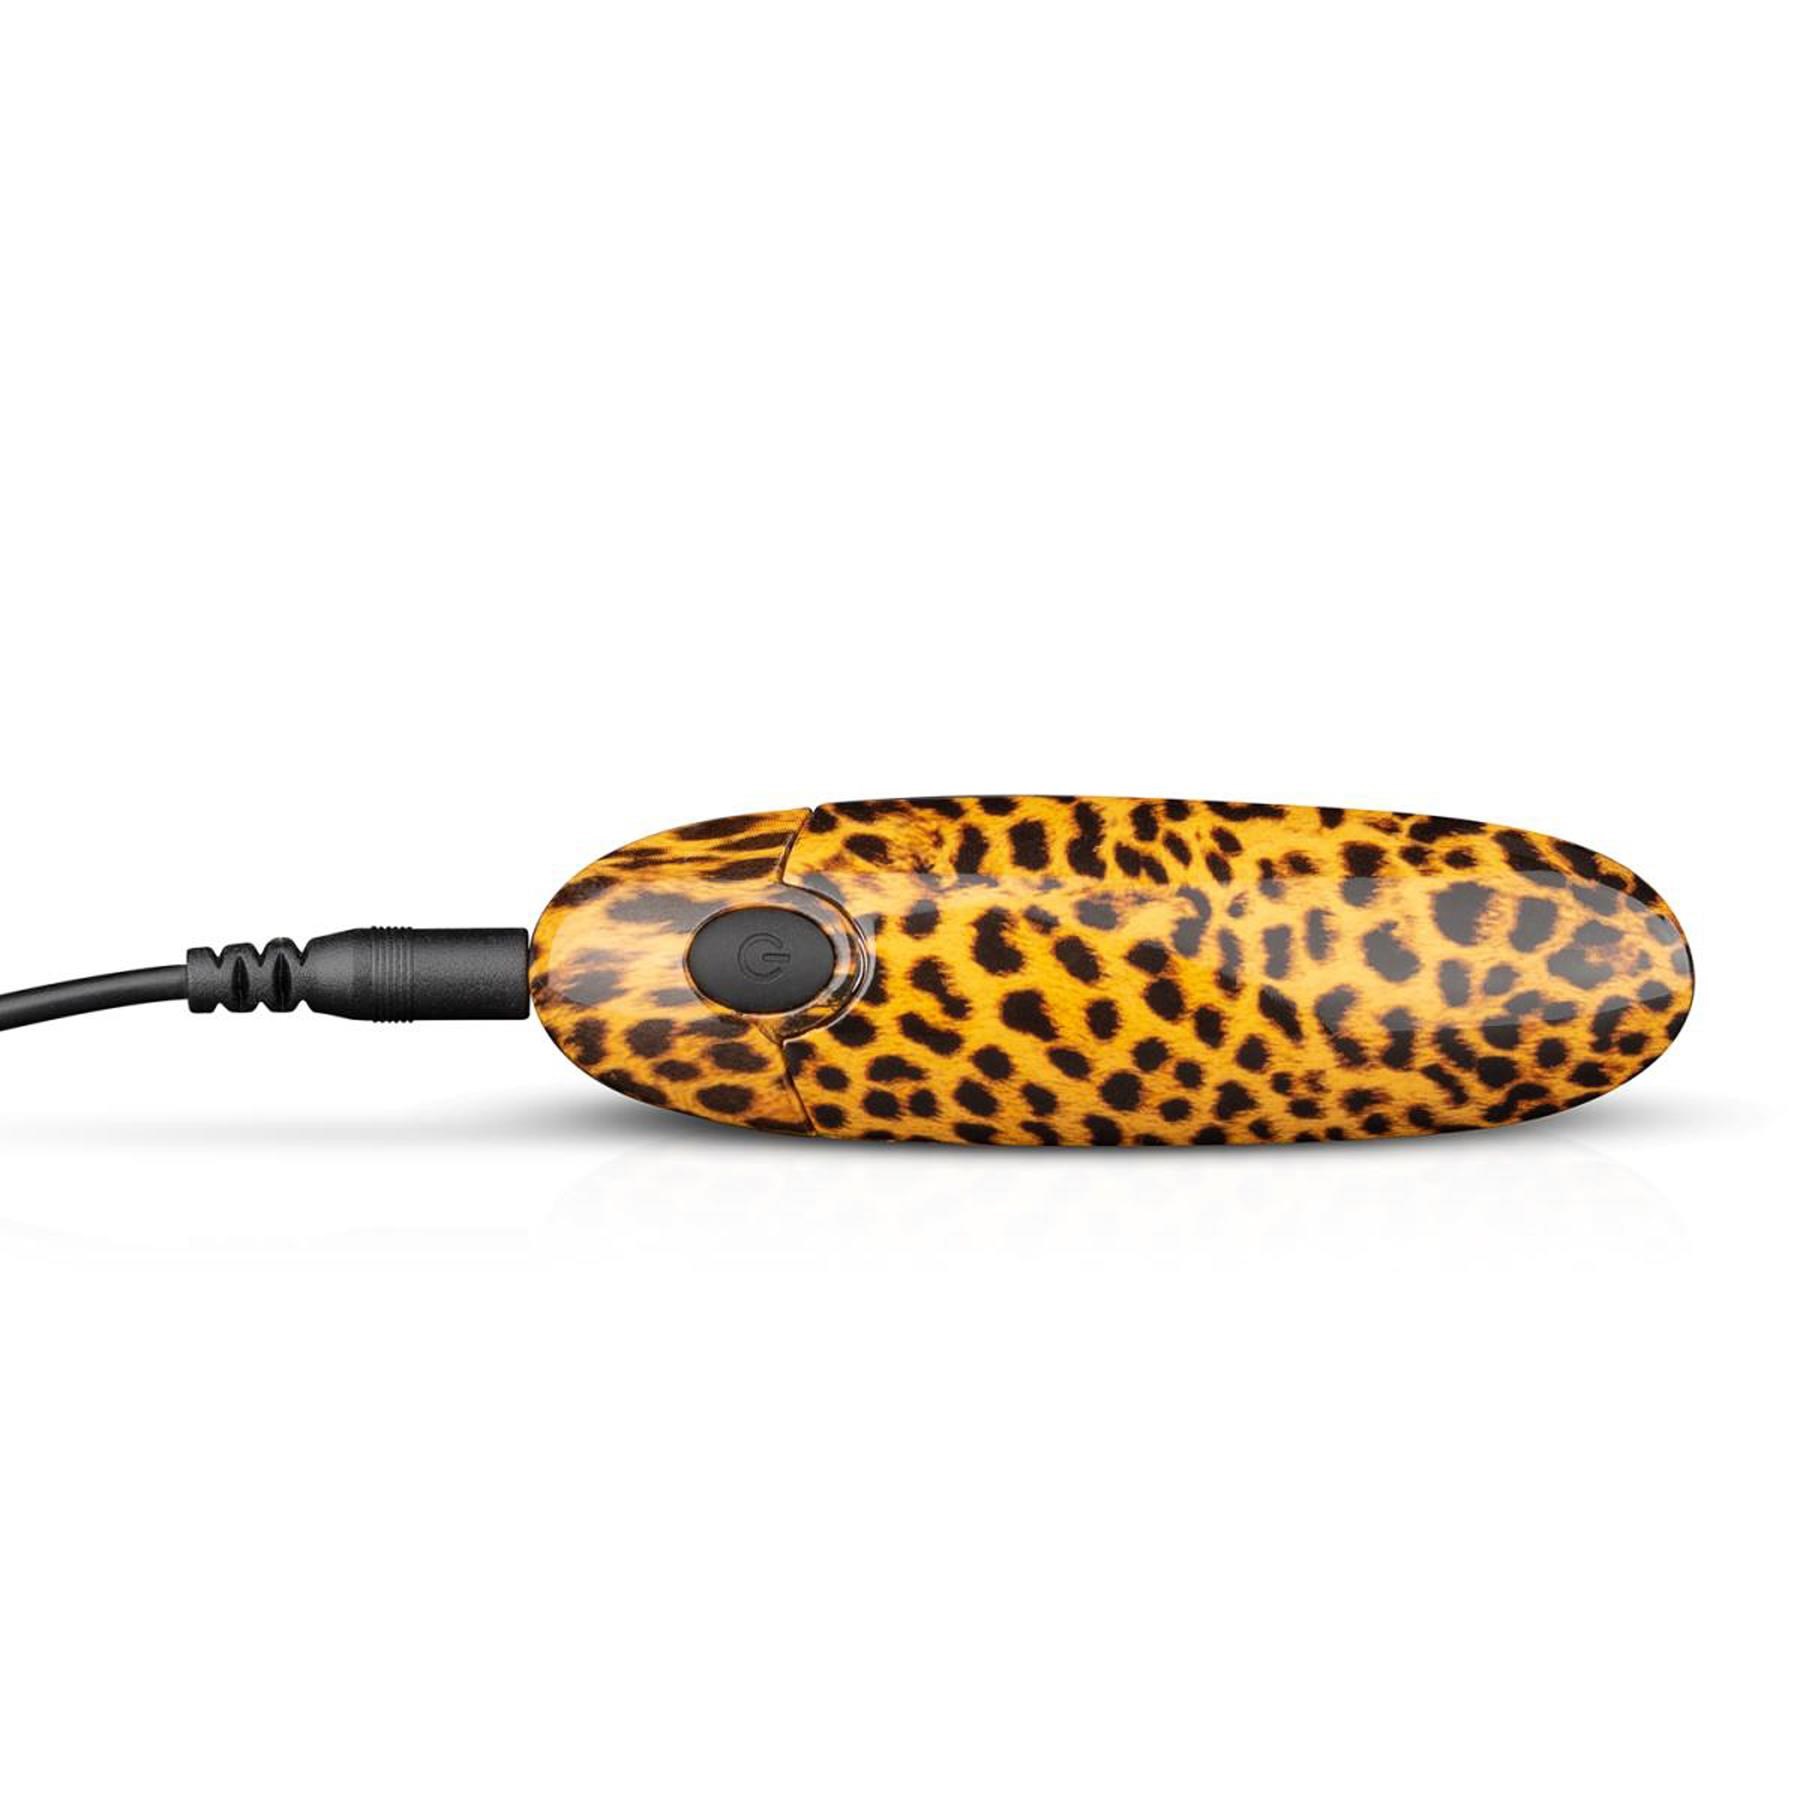 Panthra Asha Lipstick Vibrator - Product Shot Showing Where Charging Cable is Placed